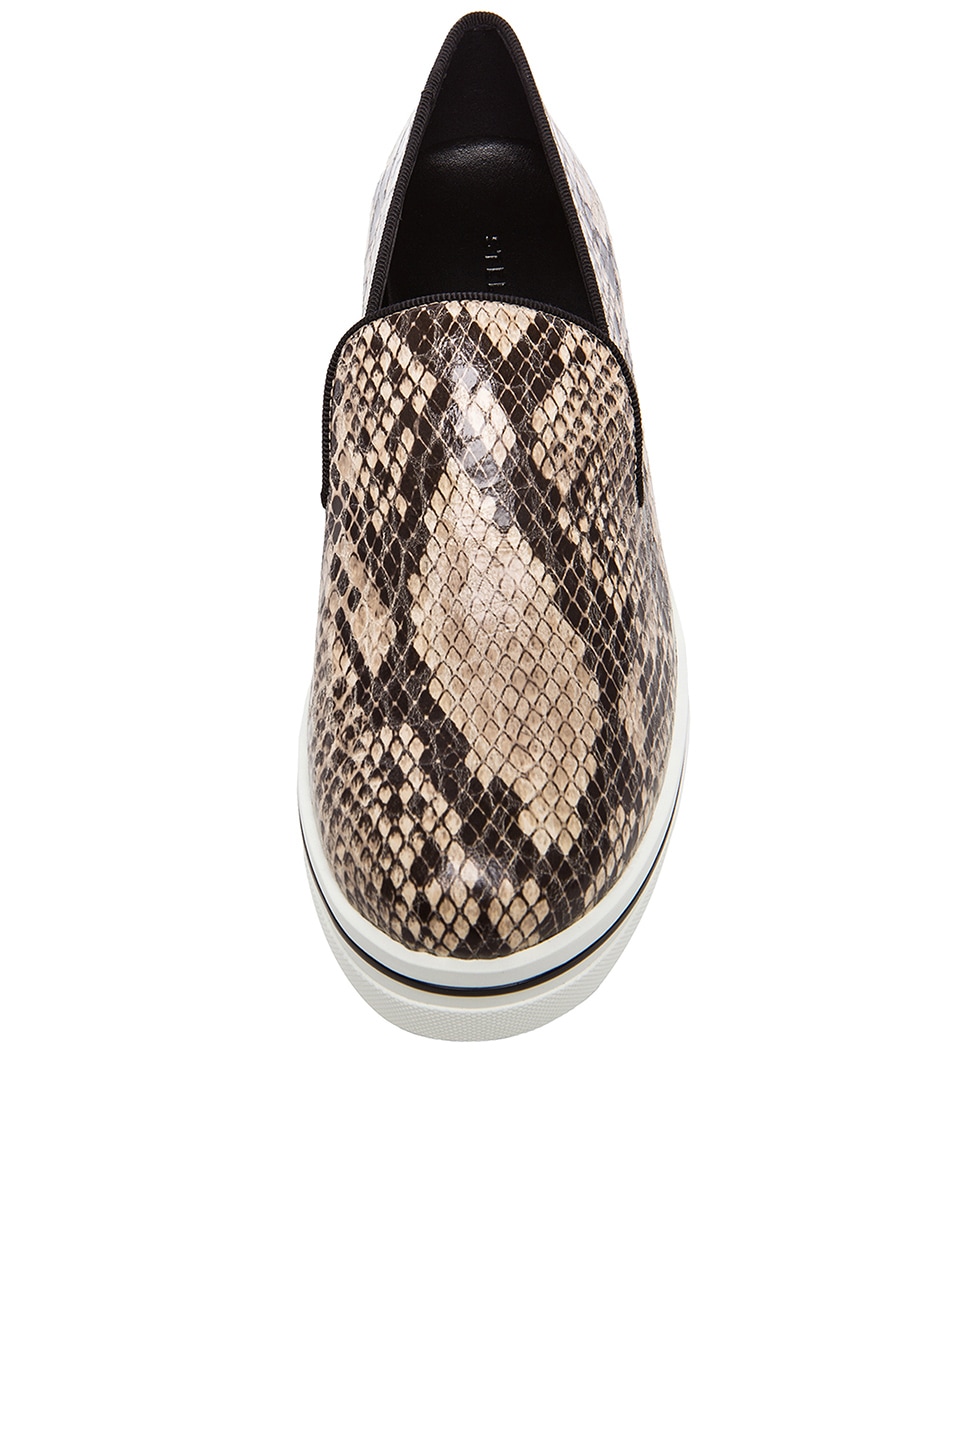 STELLA MCCARTNEY Python Embossed Faux Leather Creepers In Dust & Black